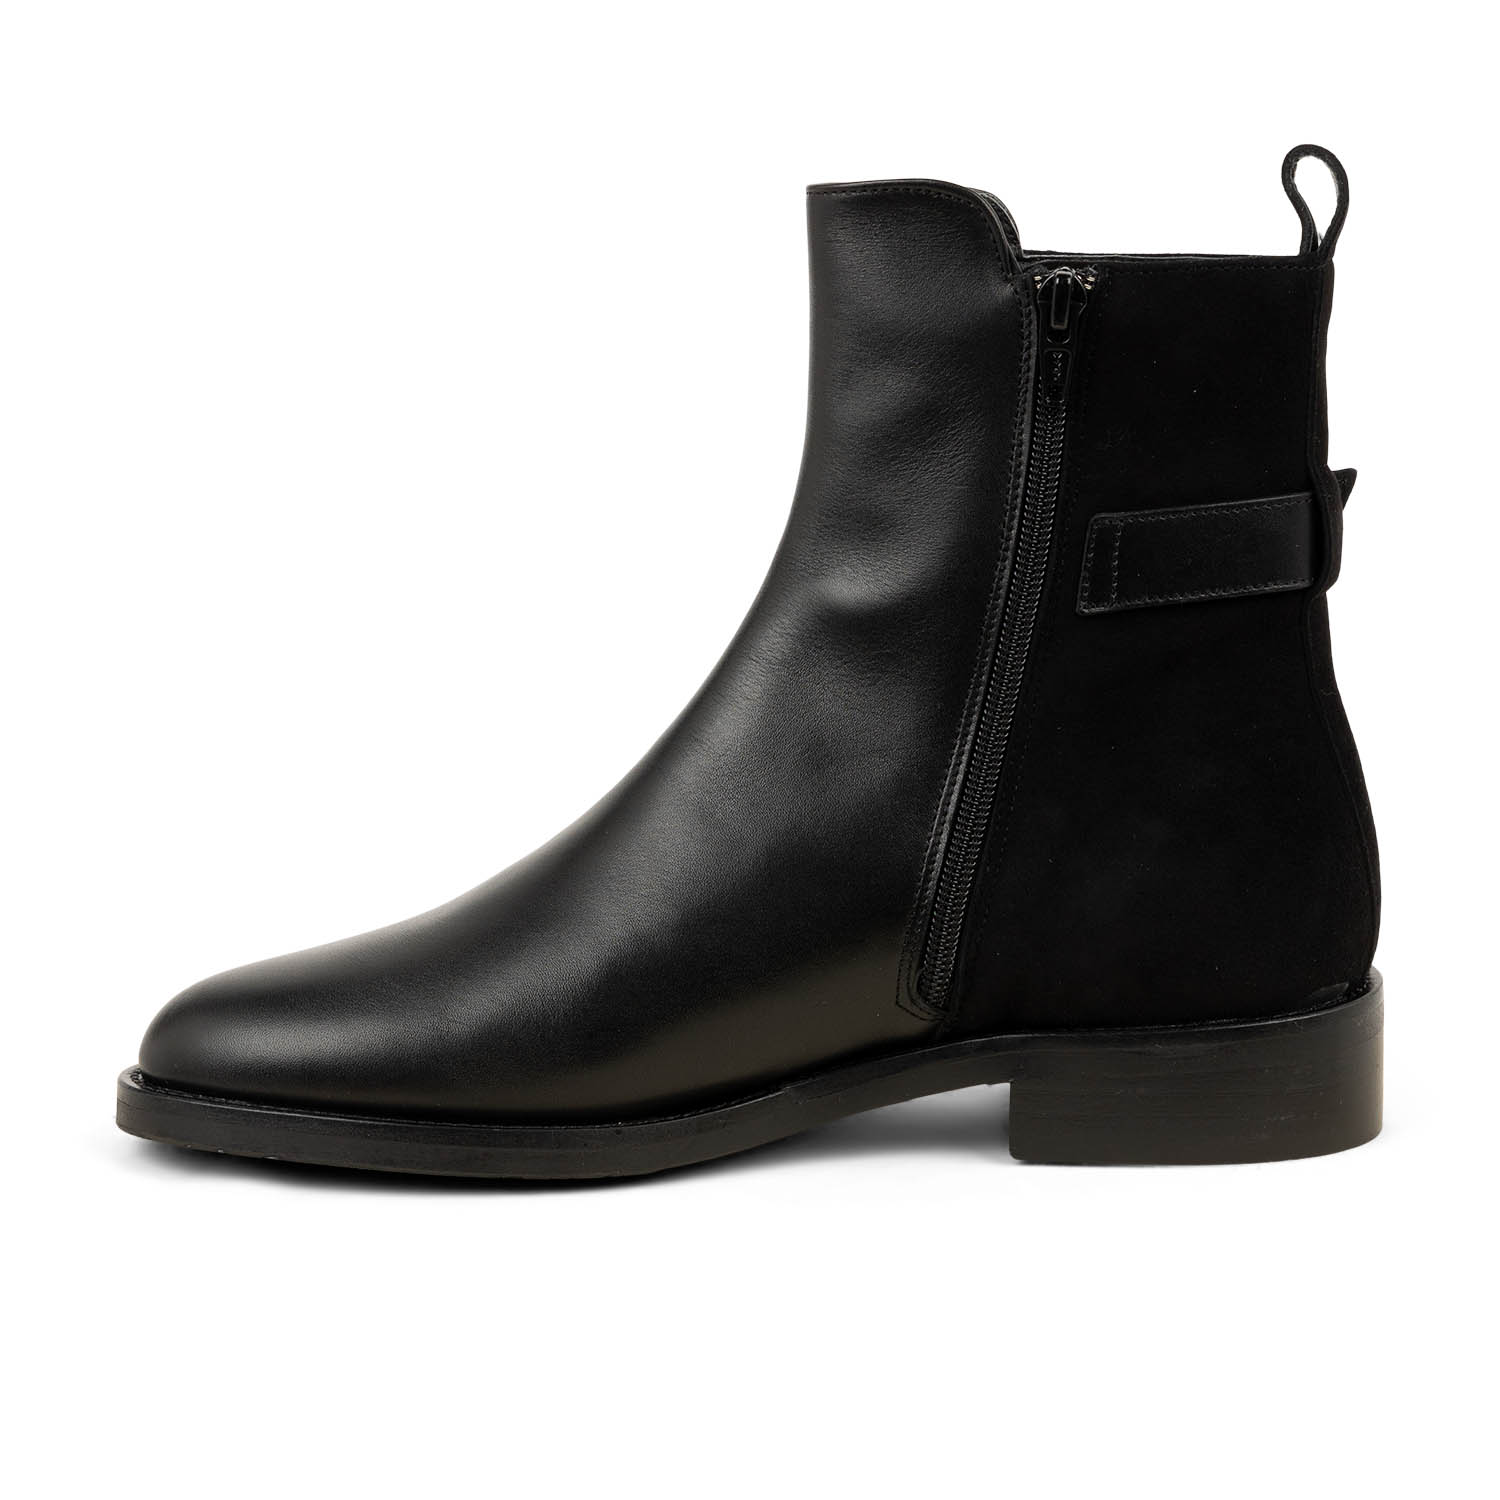 04 - PERTABOUCLE - PERTINI - Boots et bottines - Cuir